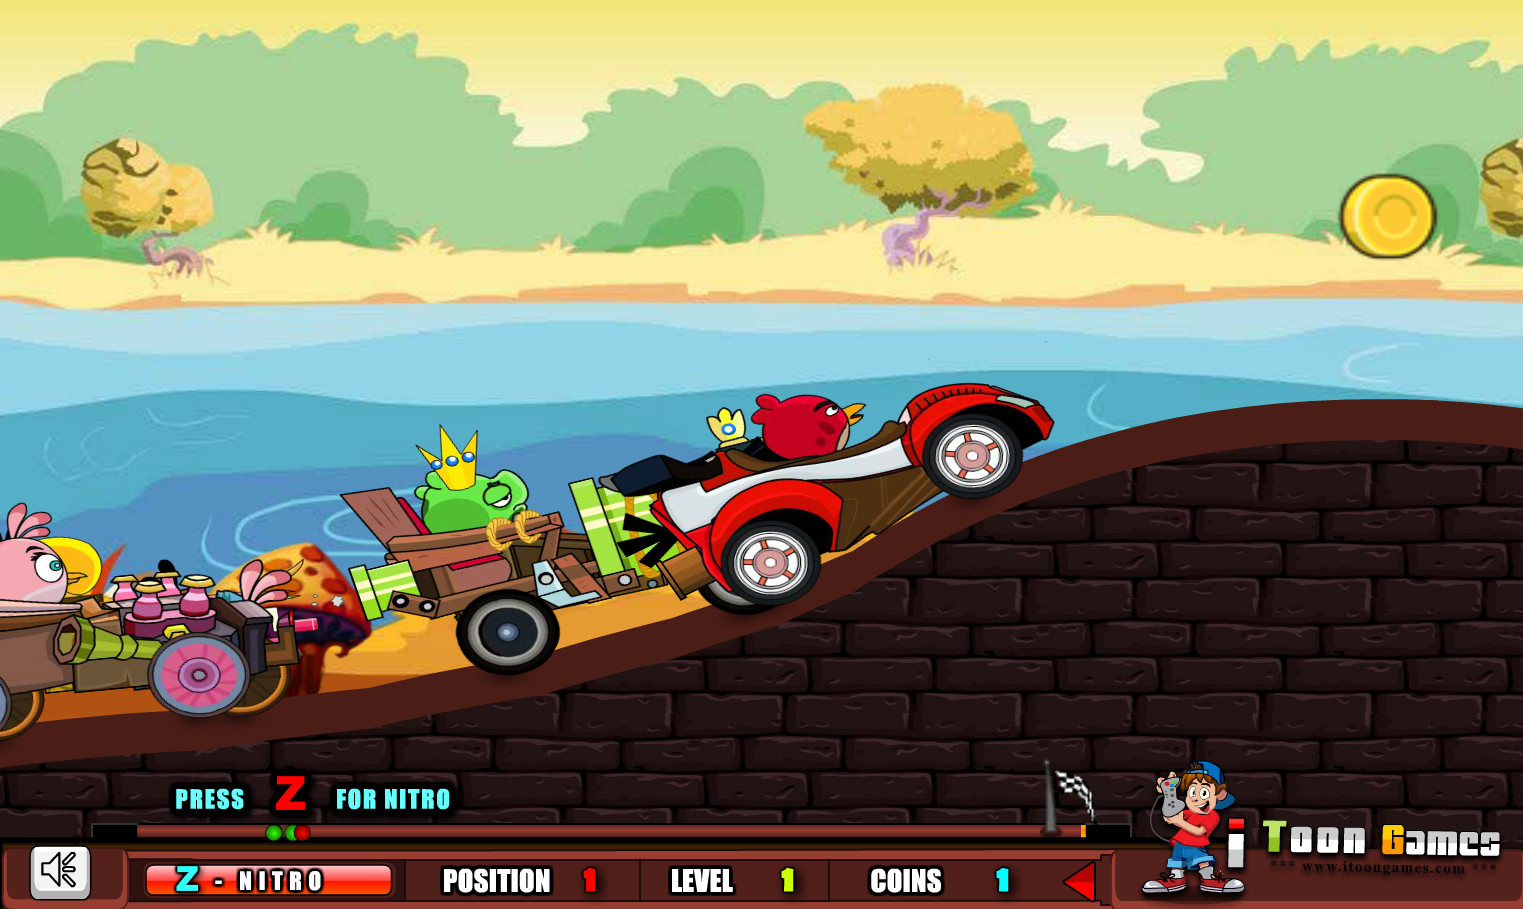 Game "Angry Birds Super Race"